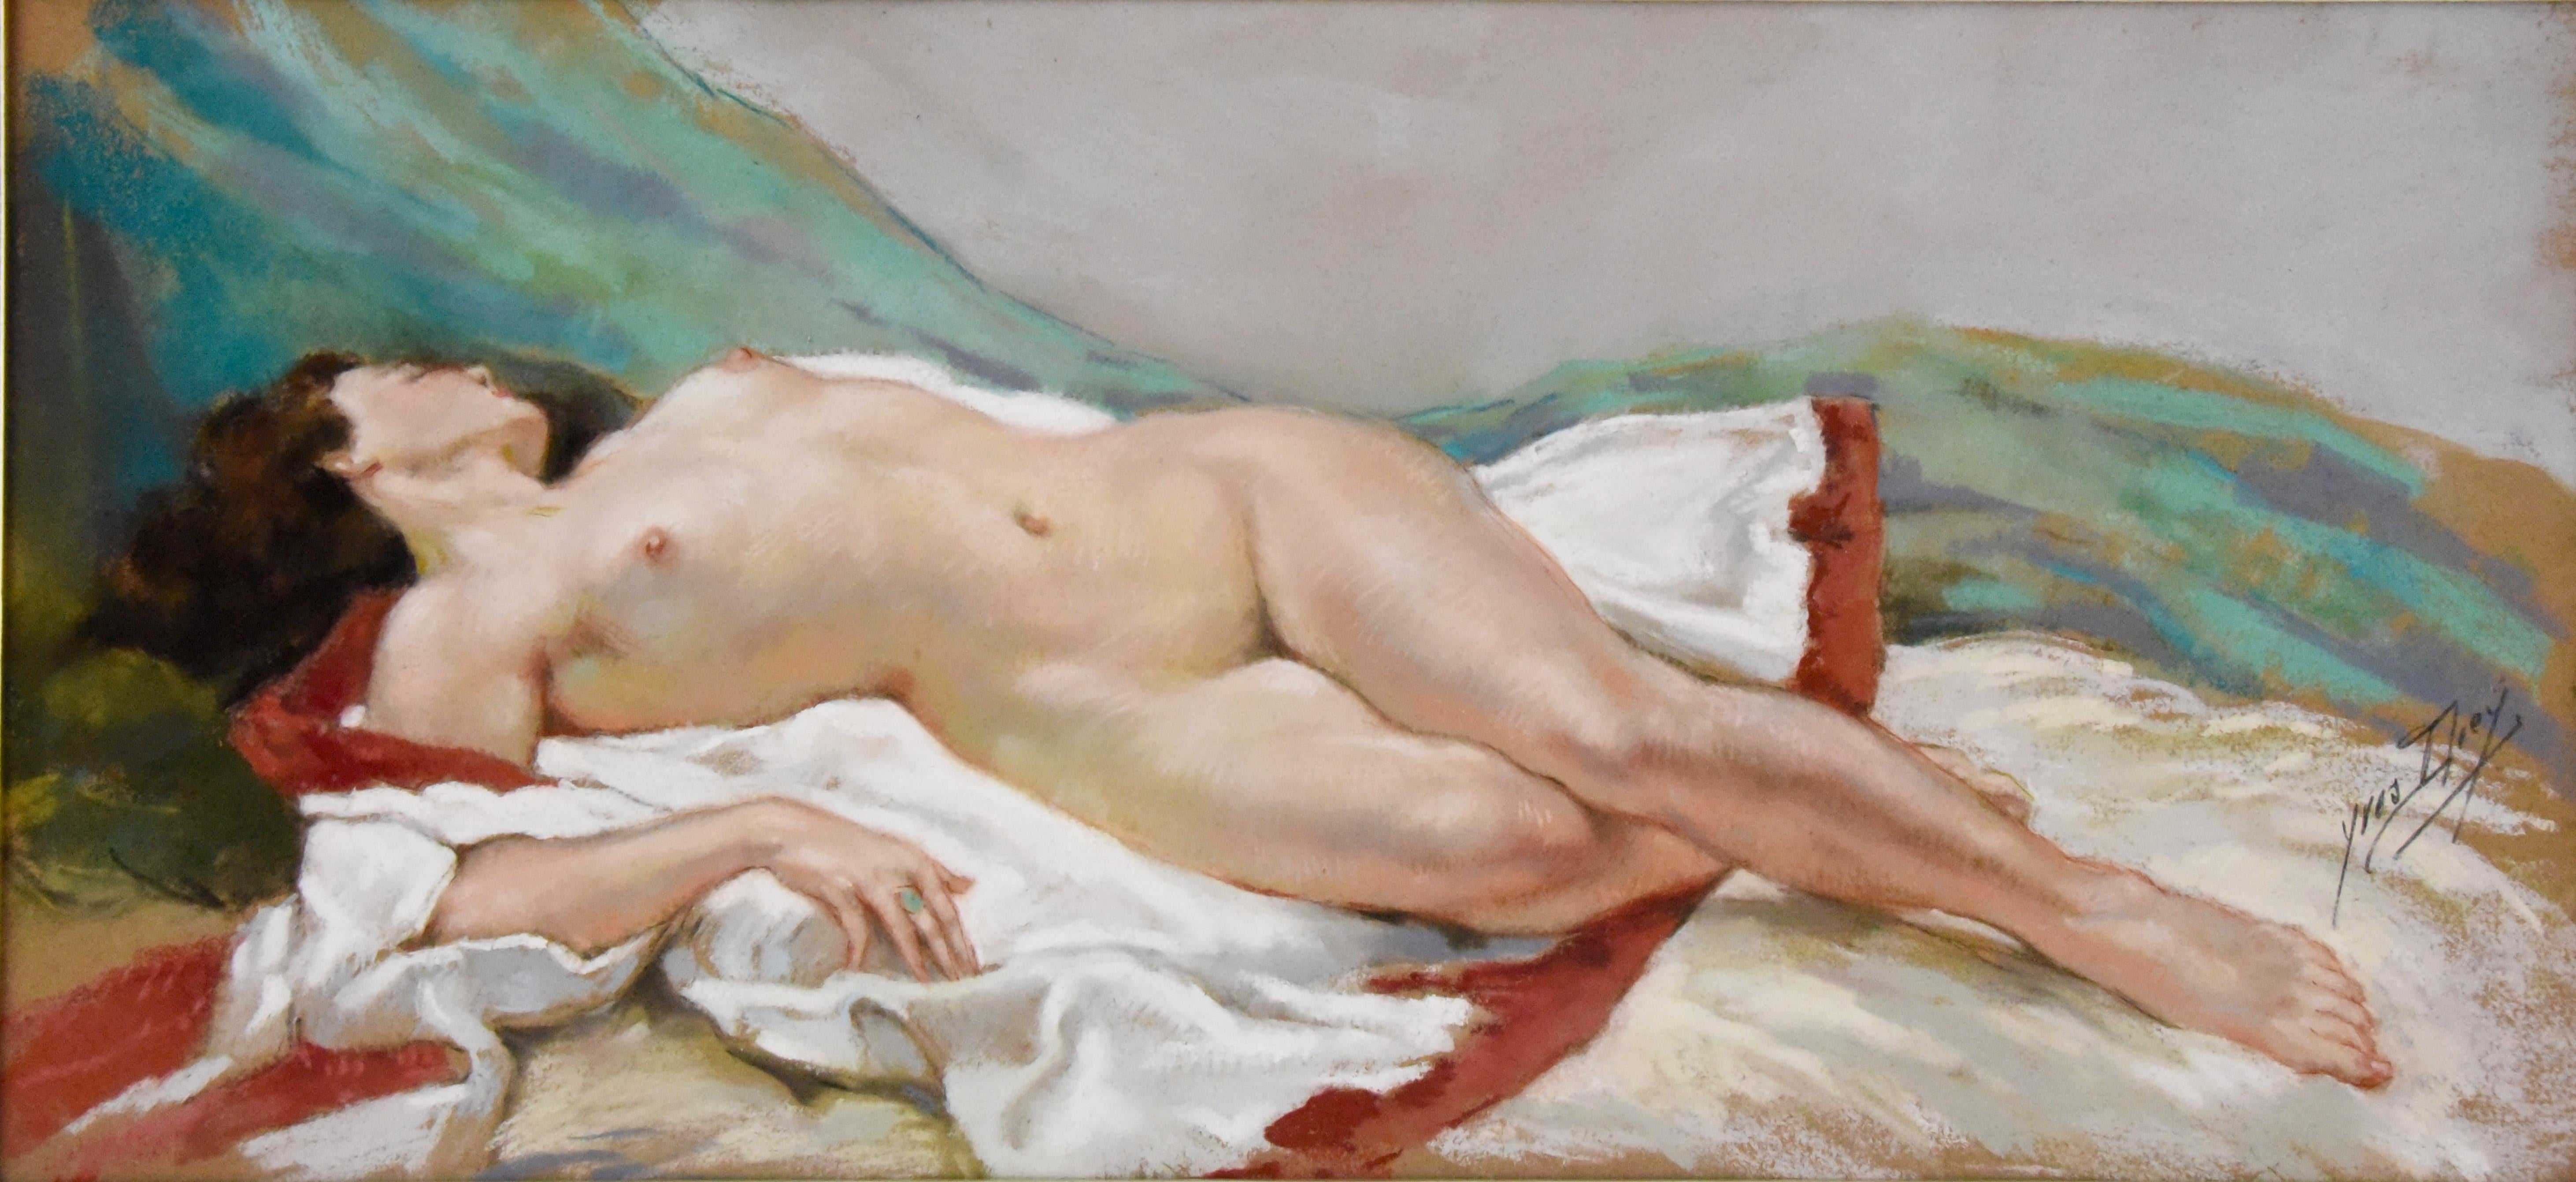 Art Deco Pastel painting of a reclining nude by Yves Diey, French artist born in 1982.
He specialized in the representation of the romantic scenes and nudes. He participated in the Salon des Artistes Français where he was a member.
He gained a 2nd